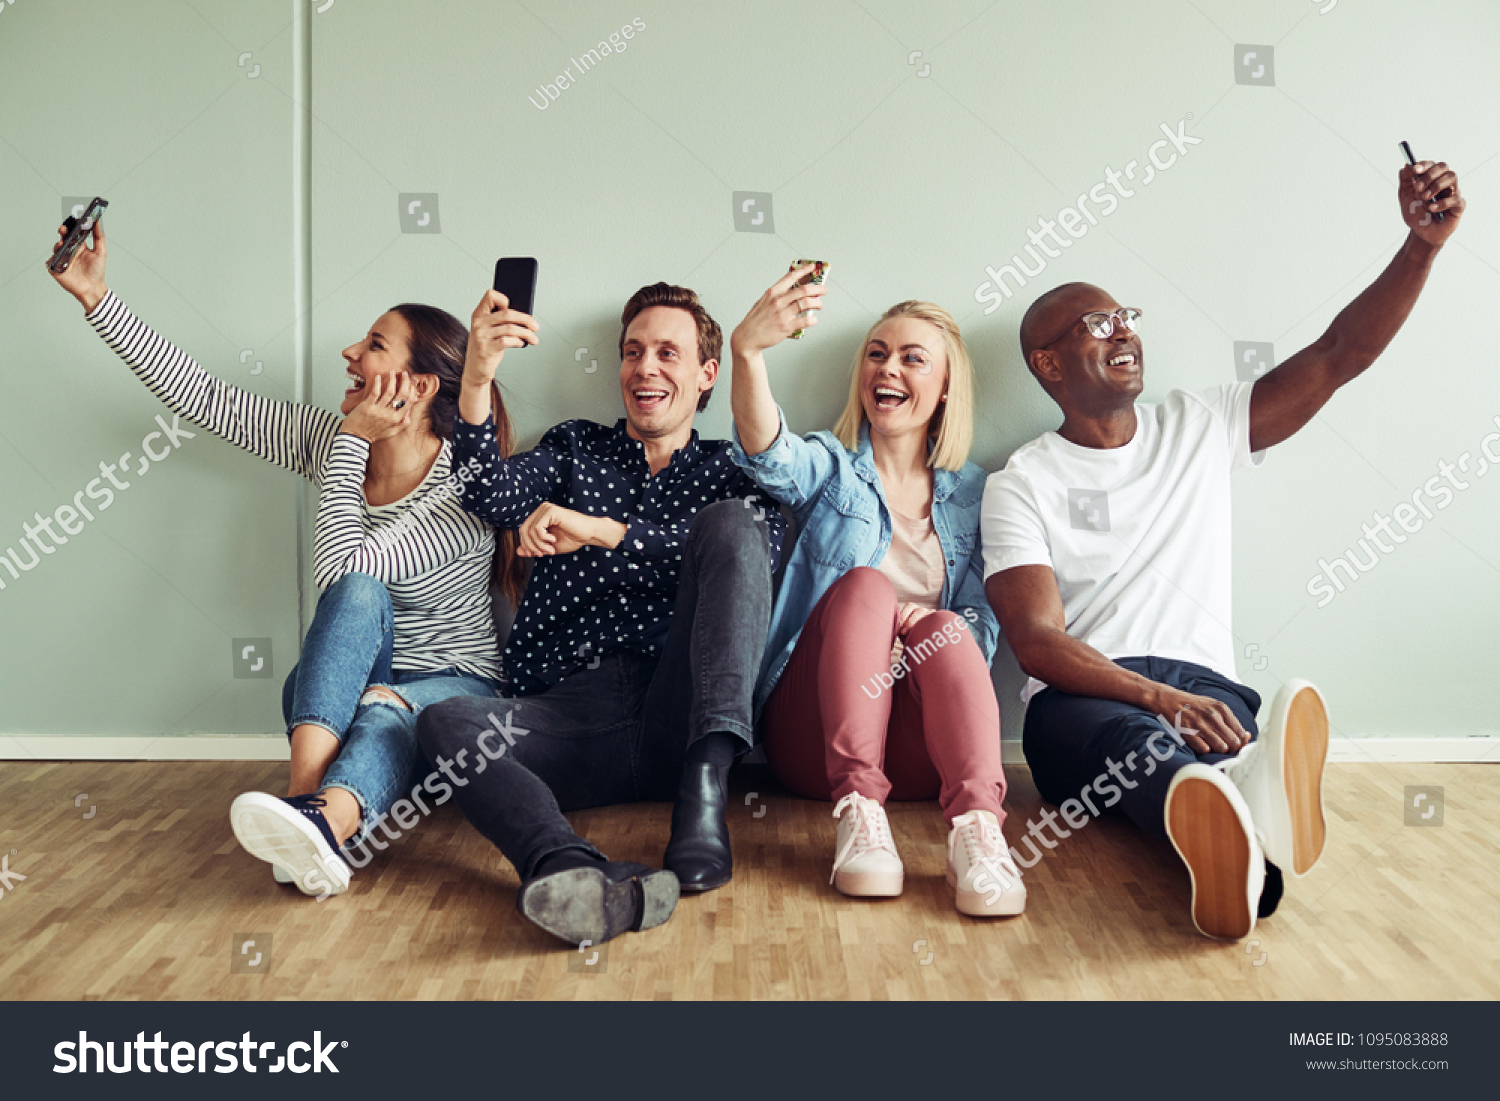 Group of diverse young businesspeople sitting on an office floor taking selfies together while on their break #1095083888